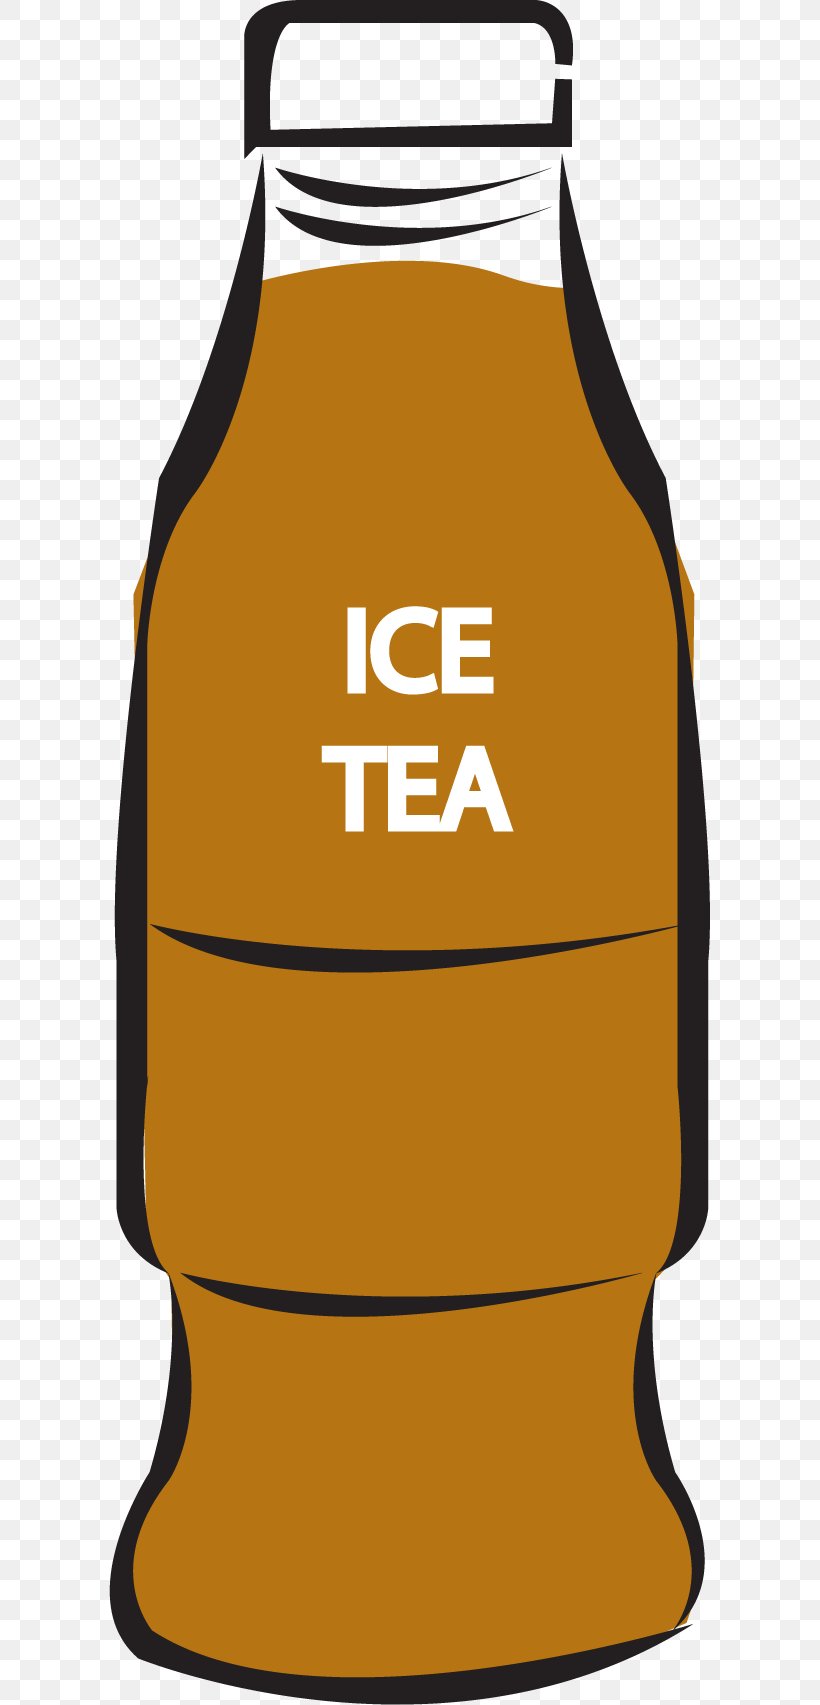 Clip Art Product Design Iced Tea, PNG, 601x1705px, Iced Tea, Icet, Yellow Download Free